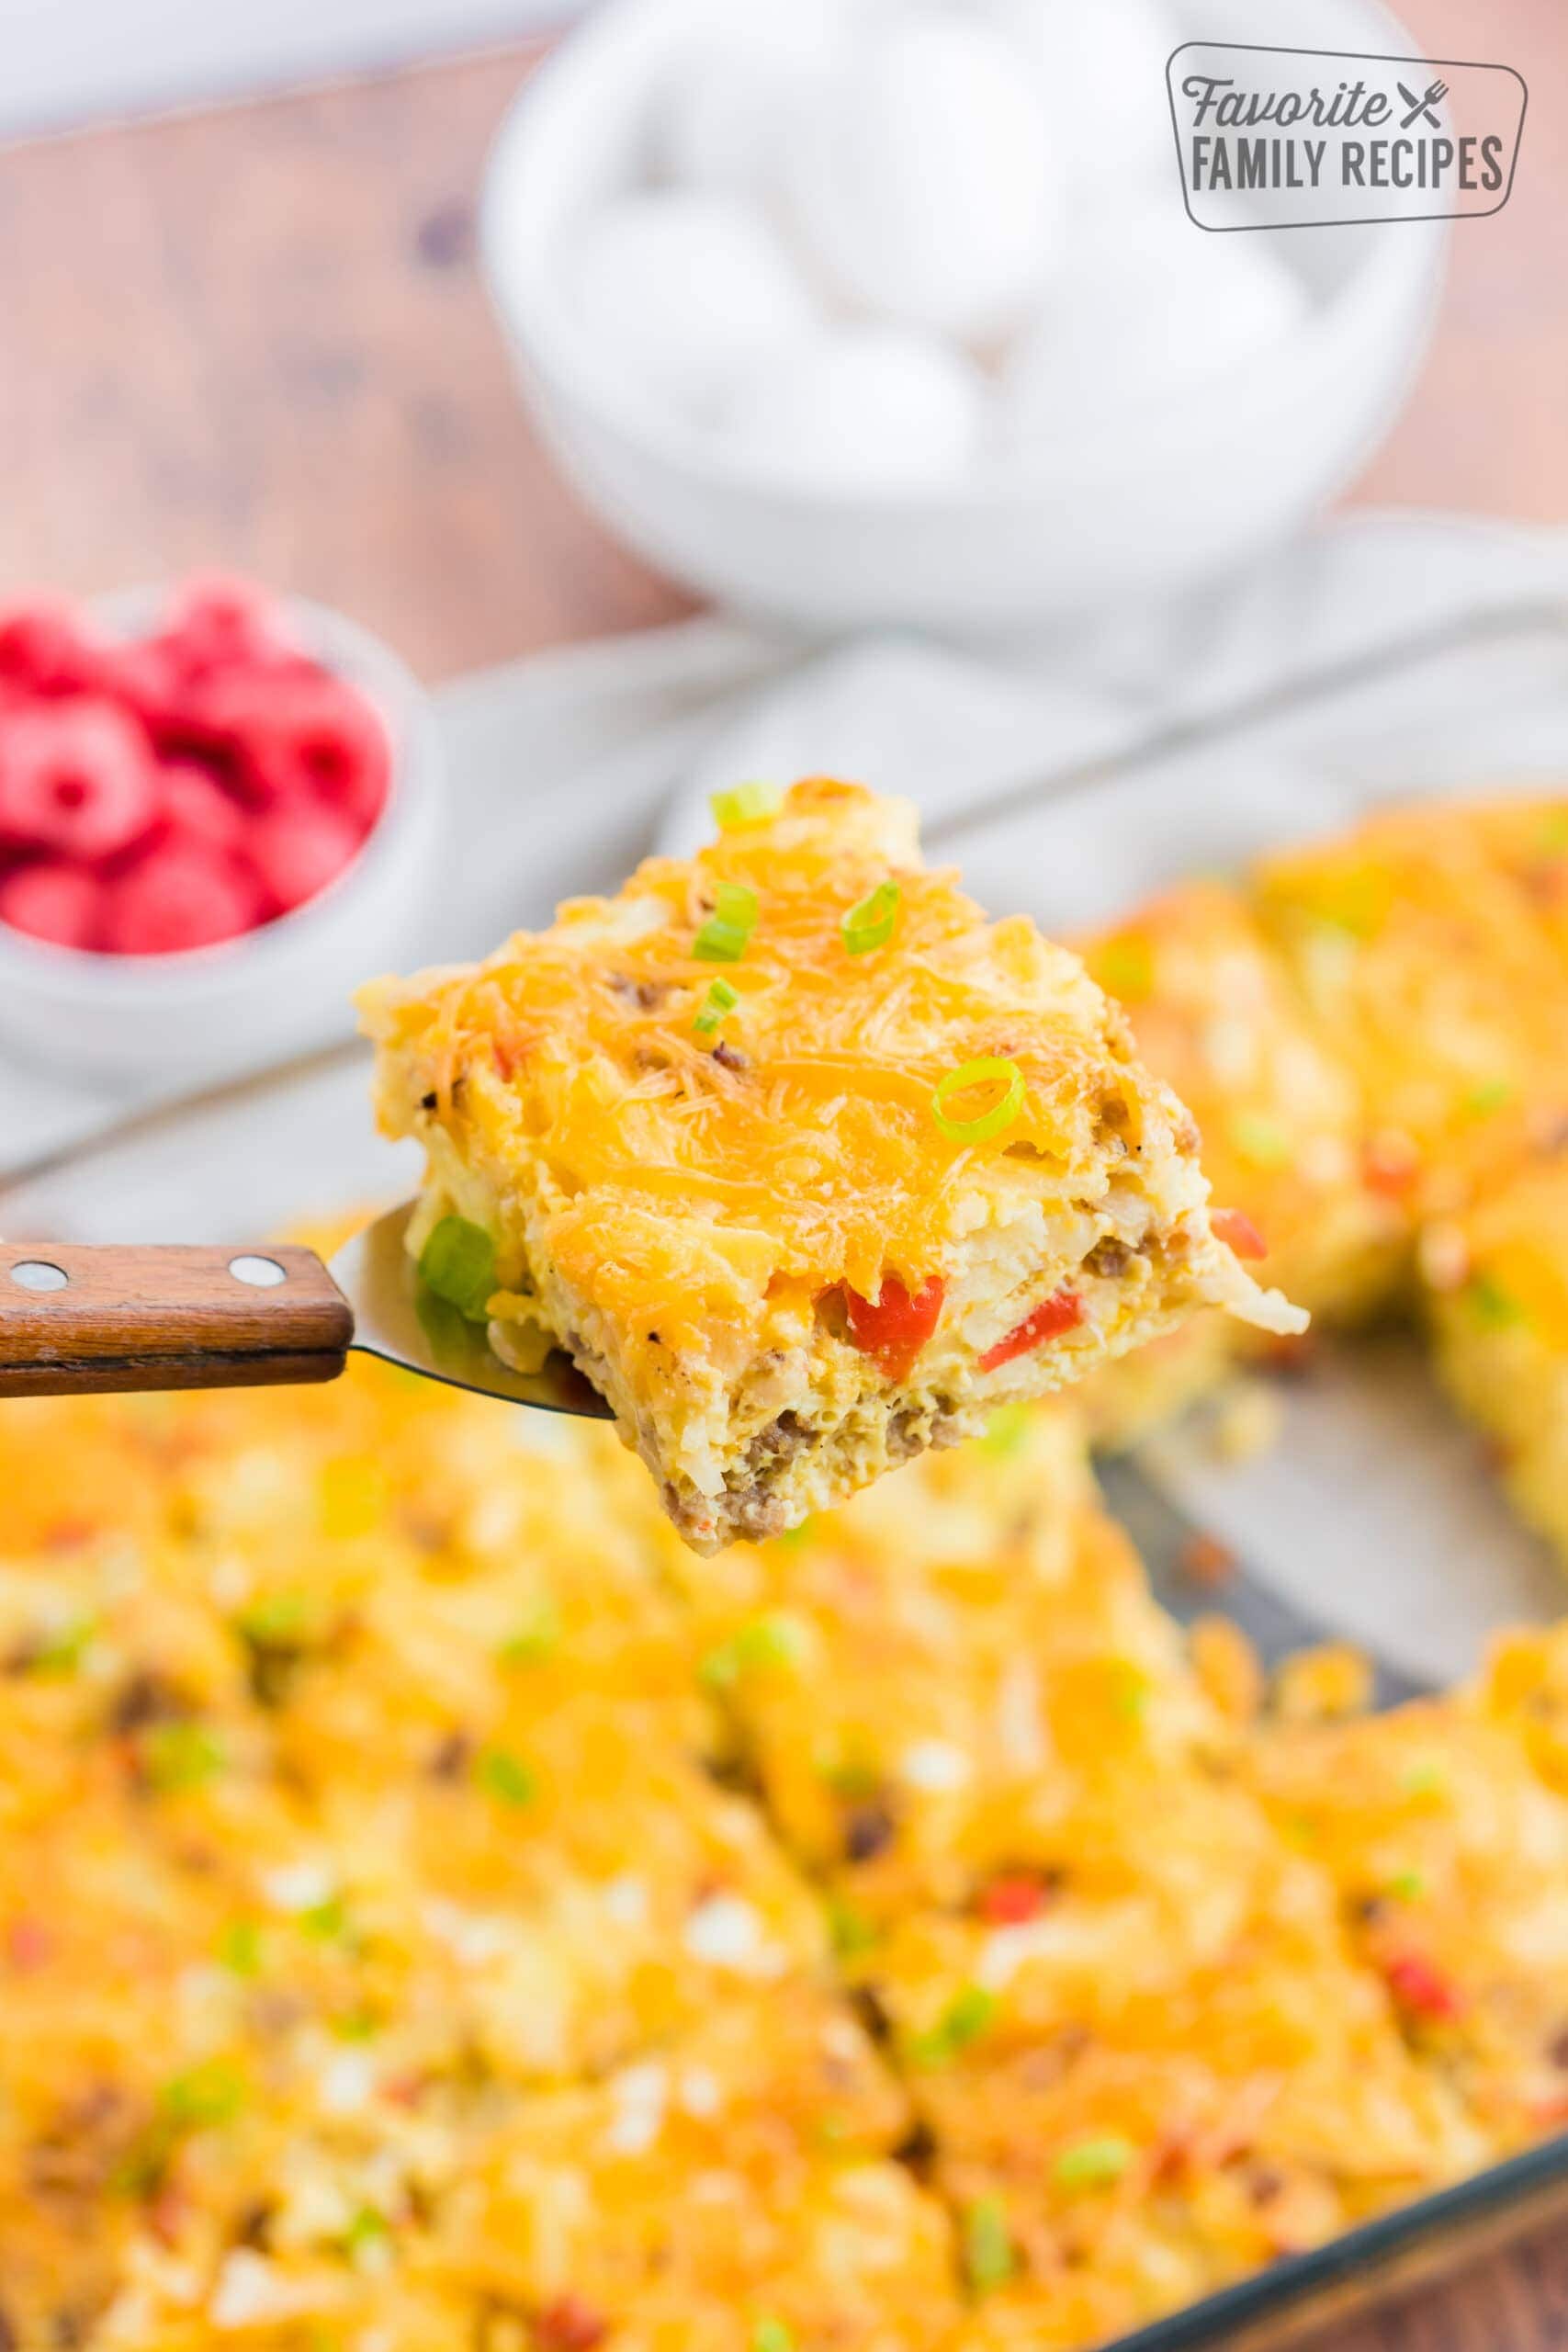 A slice of breakfast casserole being scooped out of a pan to show texture of eggs, sausage, and melted cheese